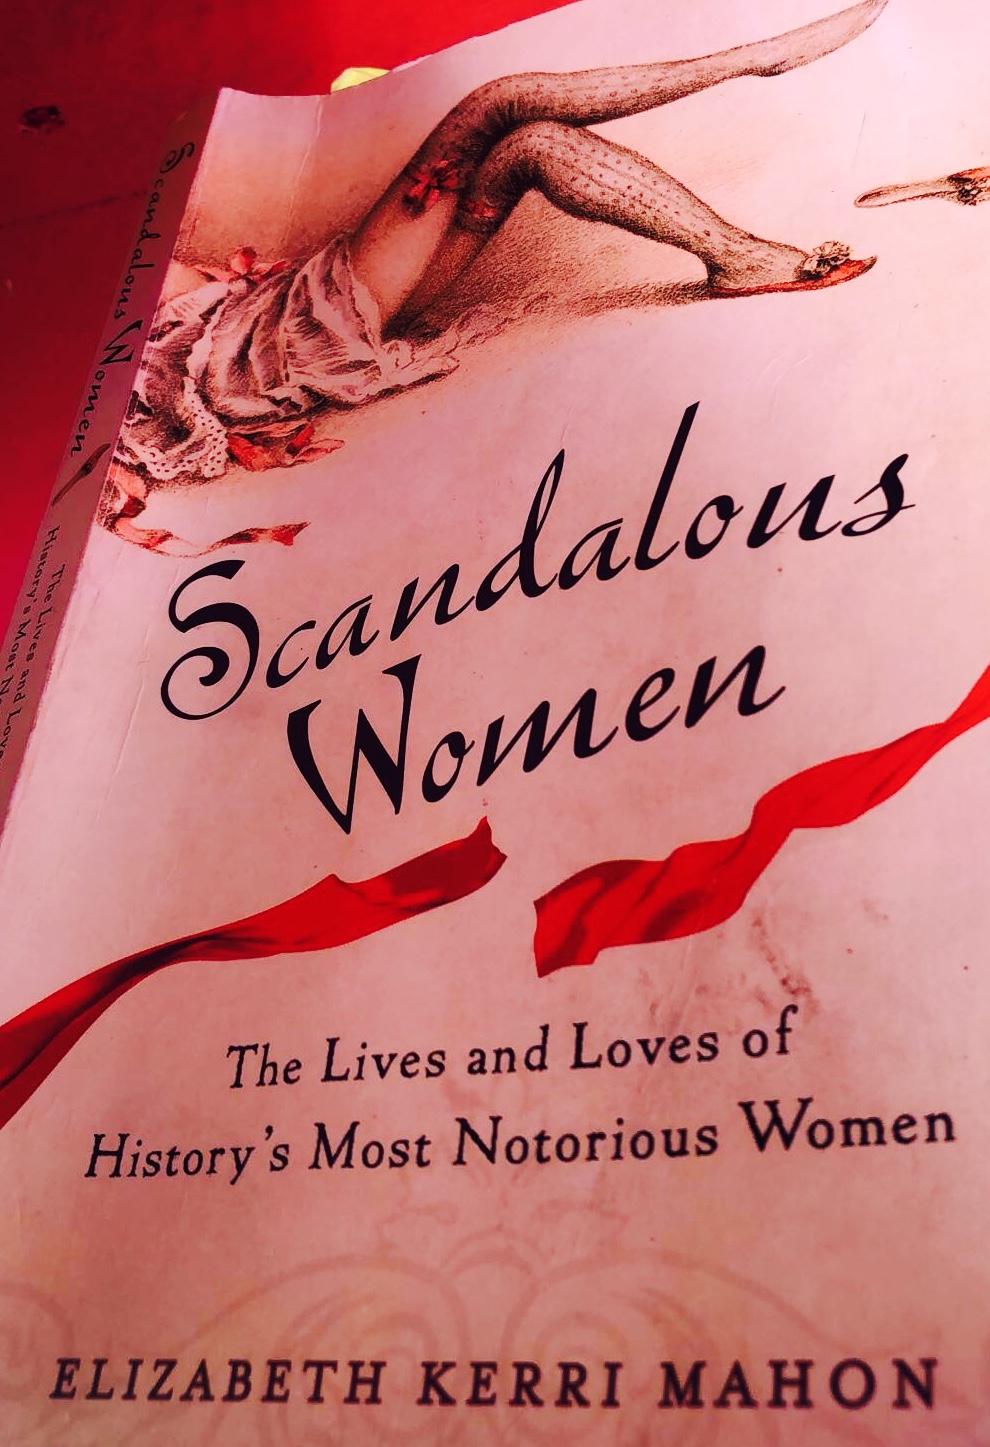 Scandalous Women: The Lives and Loves of History’s Most Notorious Women